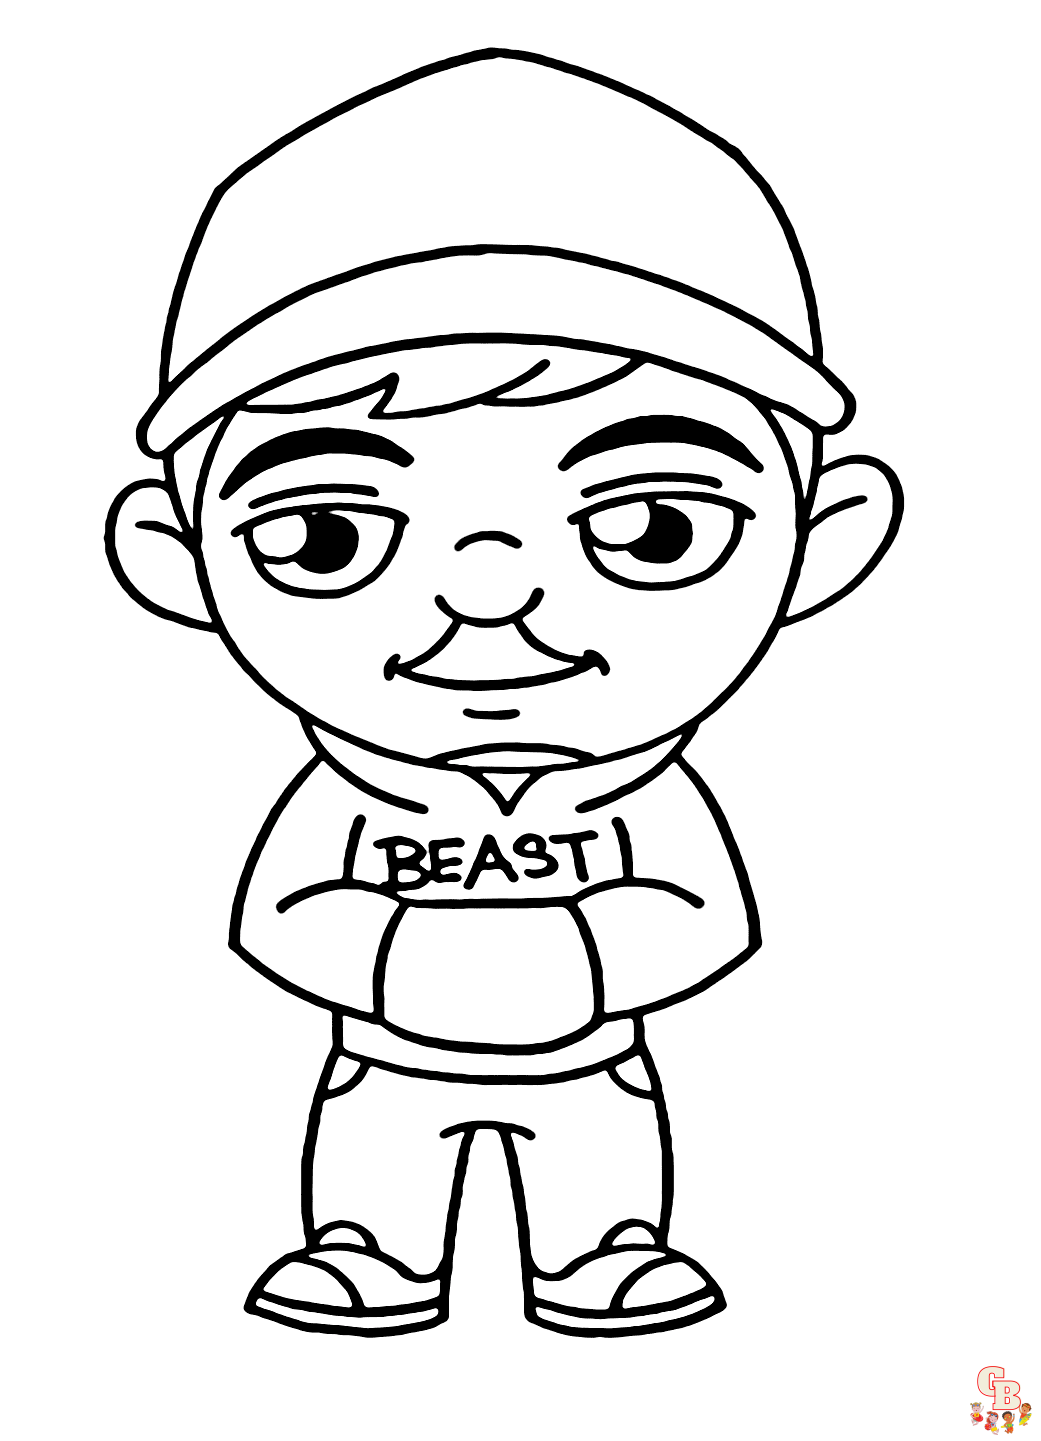 MrBeast coloring pages to print